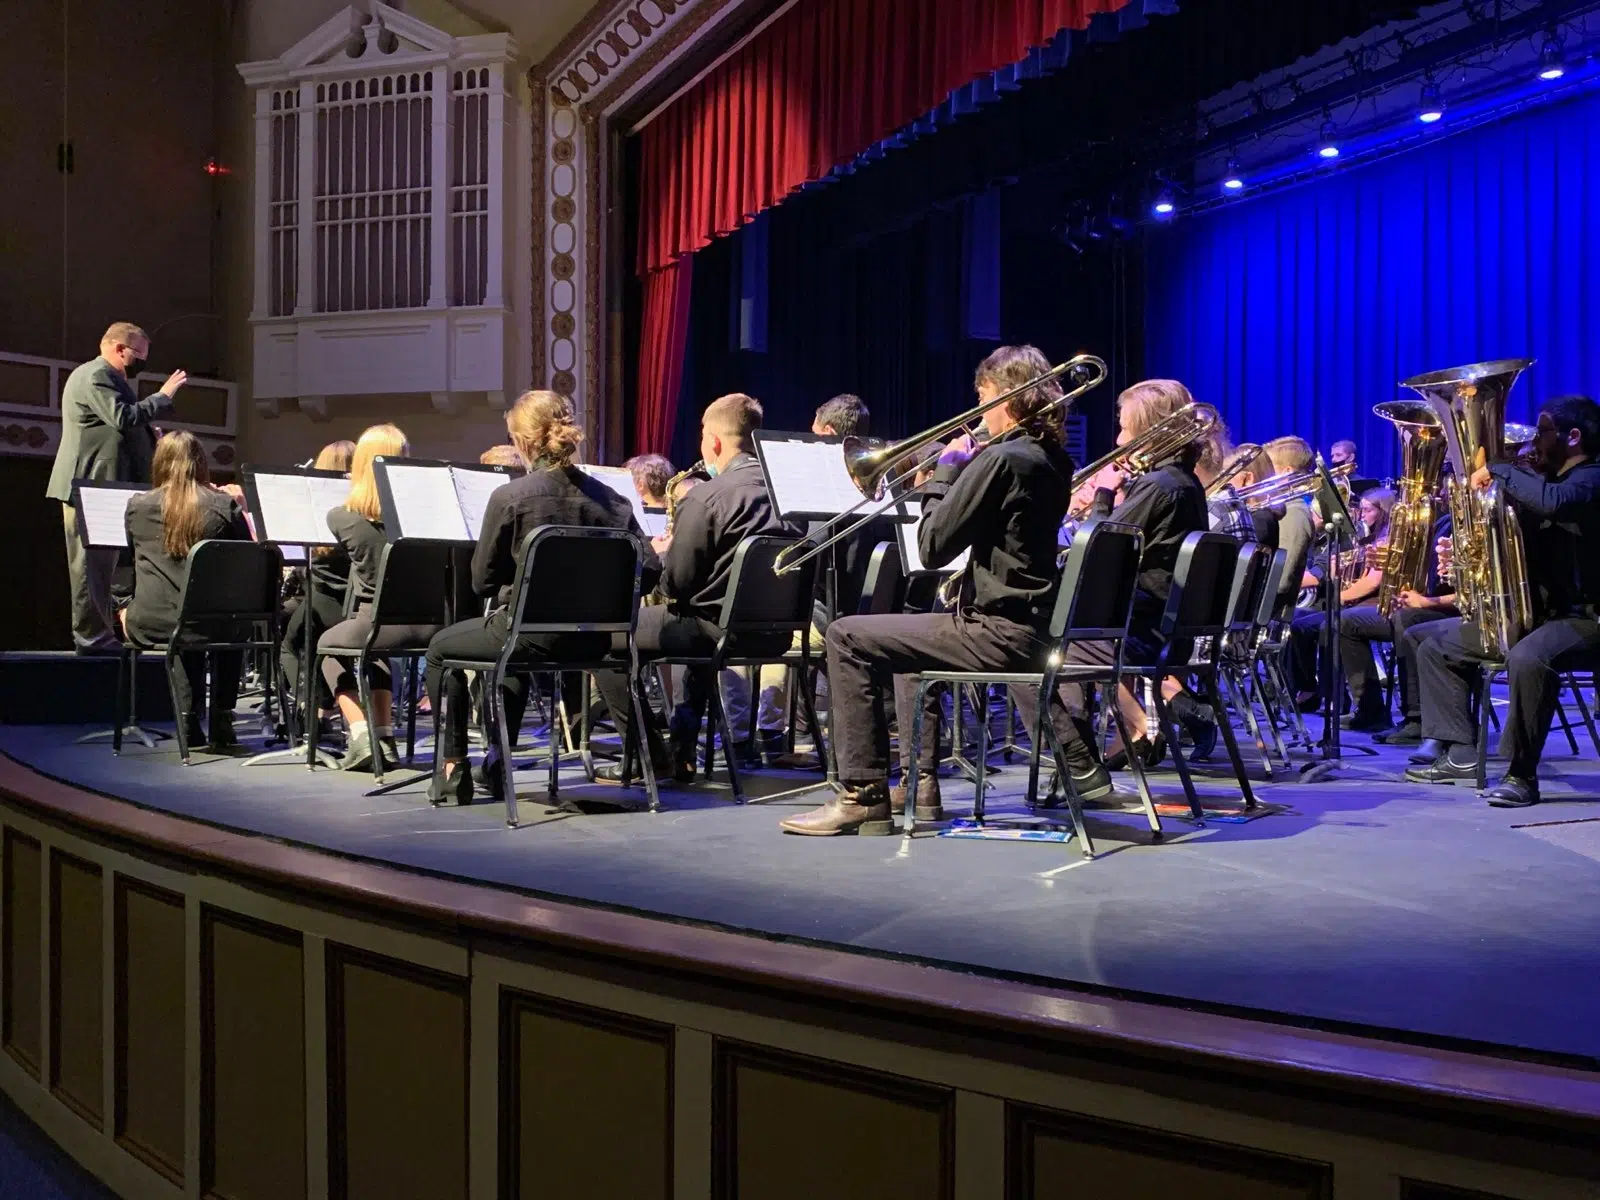 ESU welcomes high school musicians for Honors Band performance